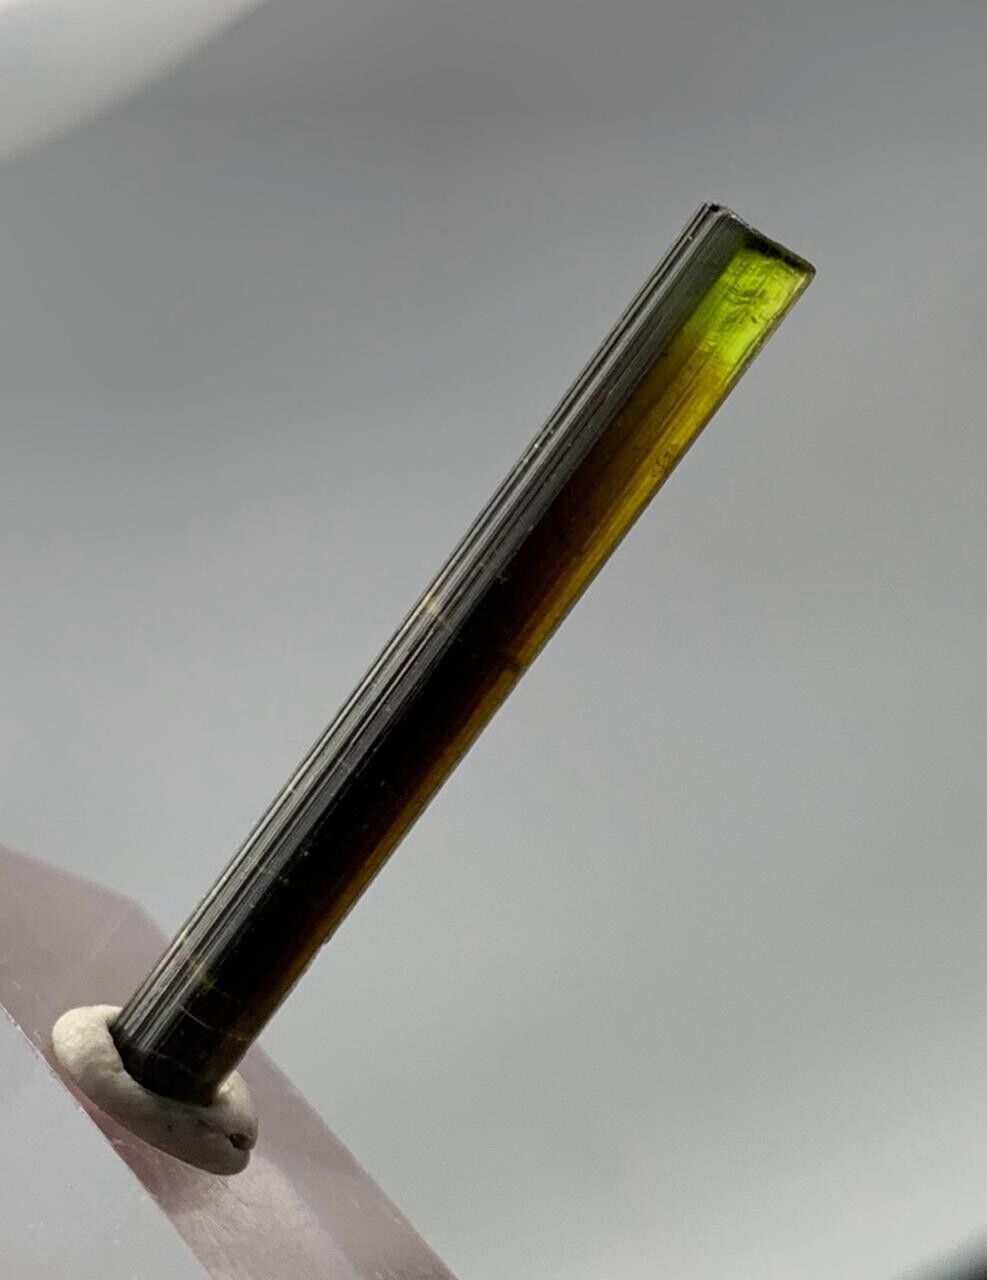 8.30 Carat beautiful terminated green Tourmaline crystal from Afghanistan